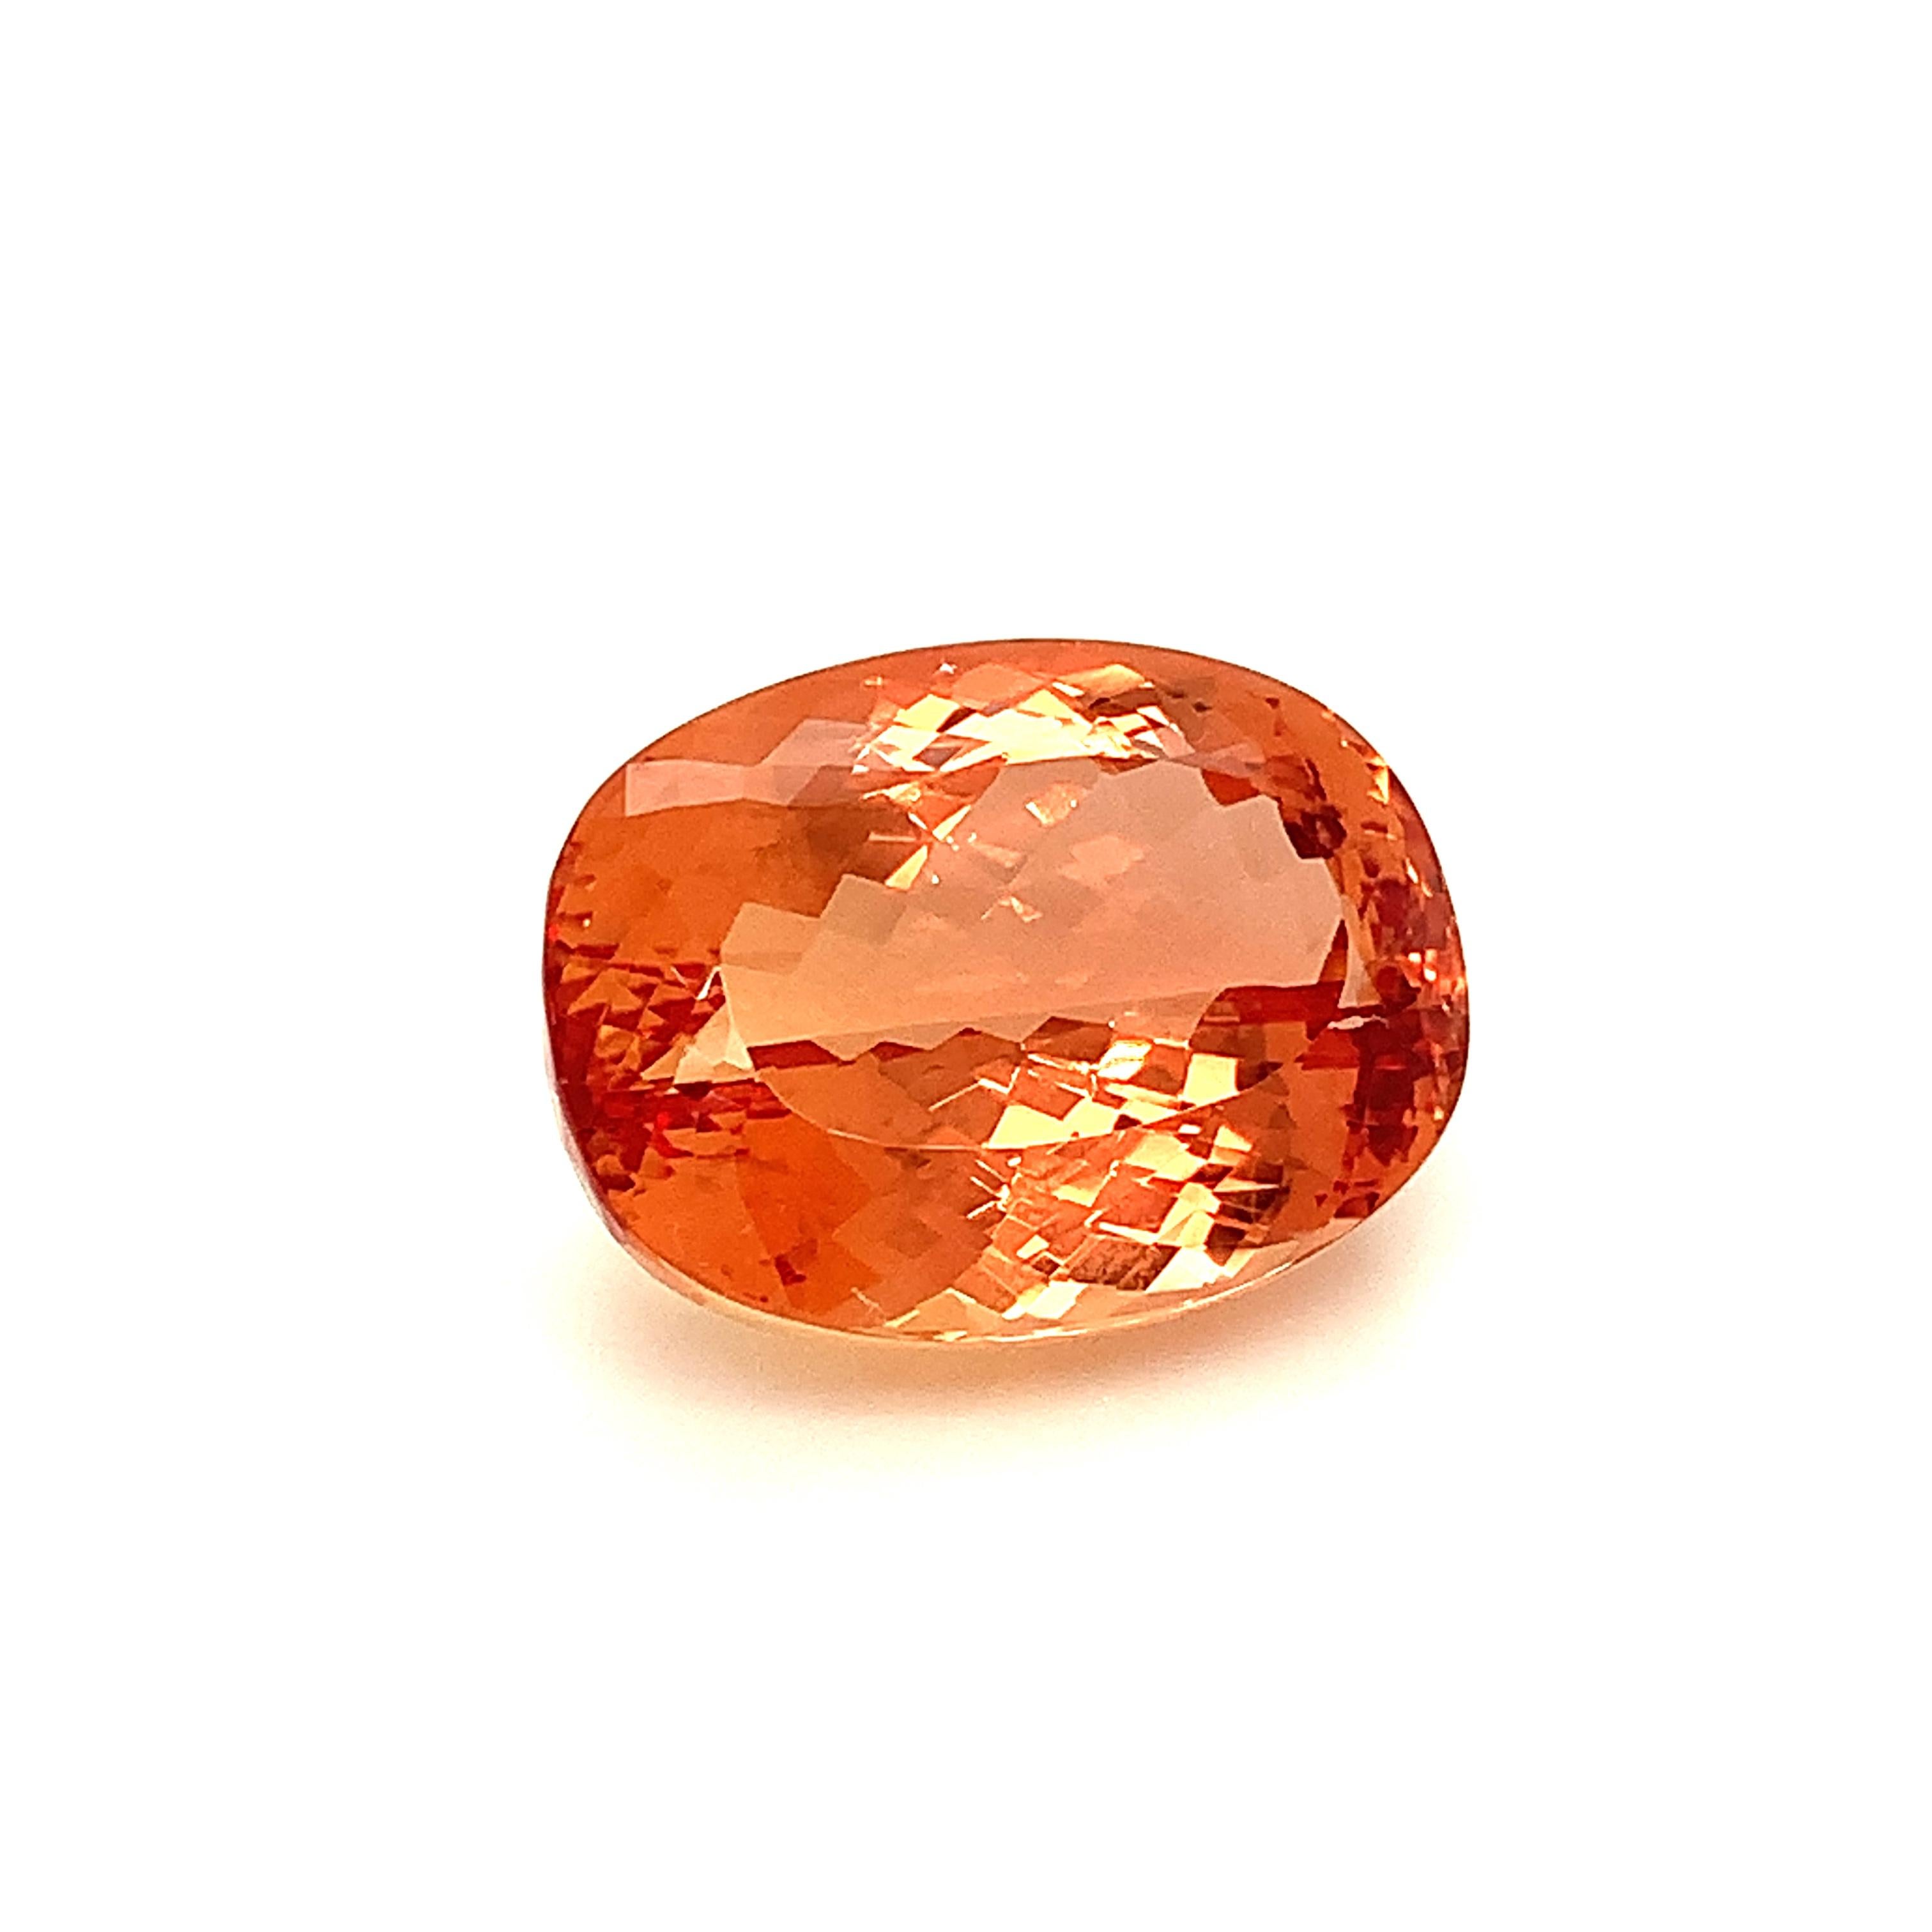 Cushion Cut 33.95 Carat Imperial Topaz Cushion, Unset Loose Gemstone, GIA Certified For Sale